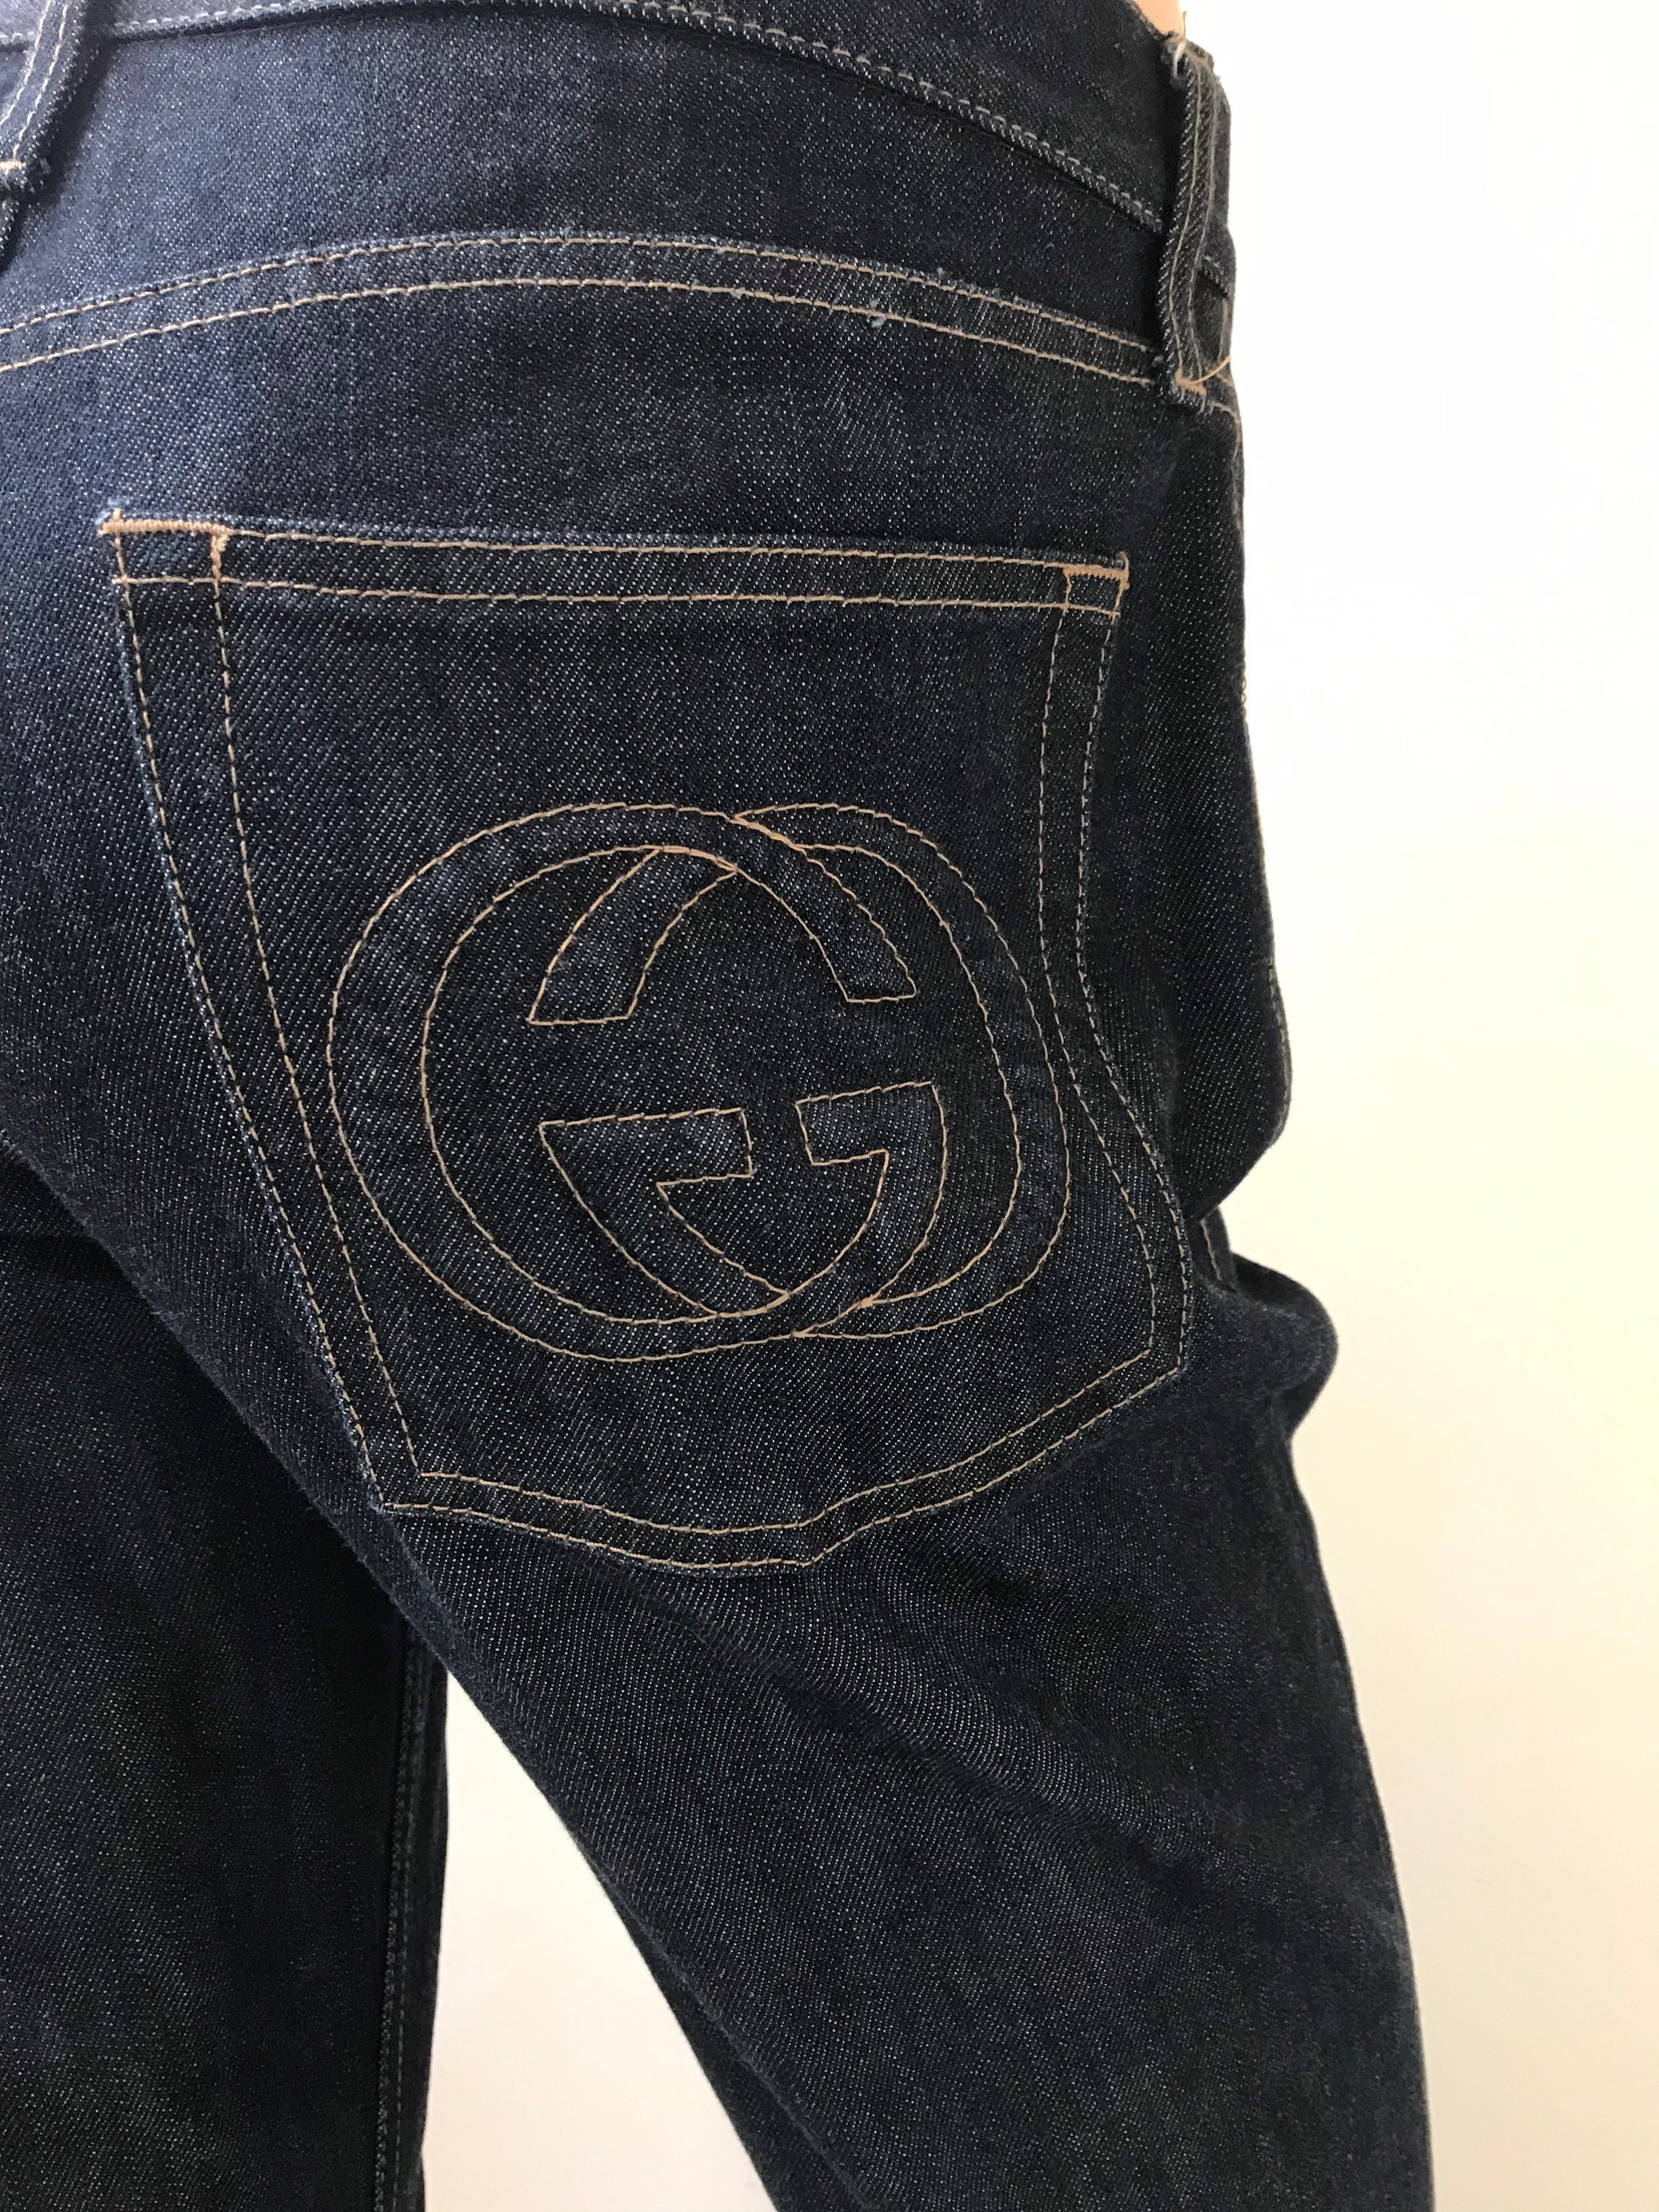 Gucci Jeans - Etsy